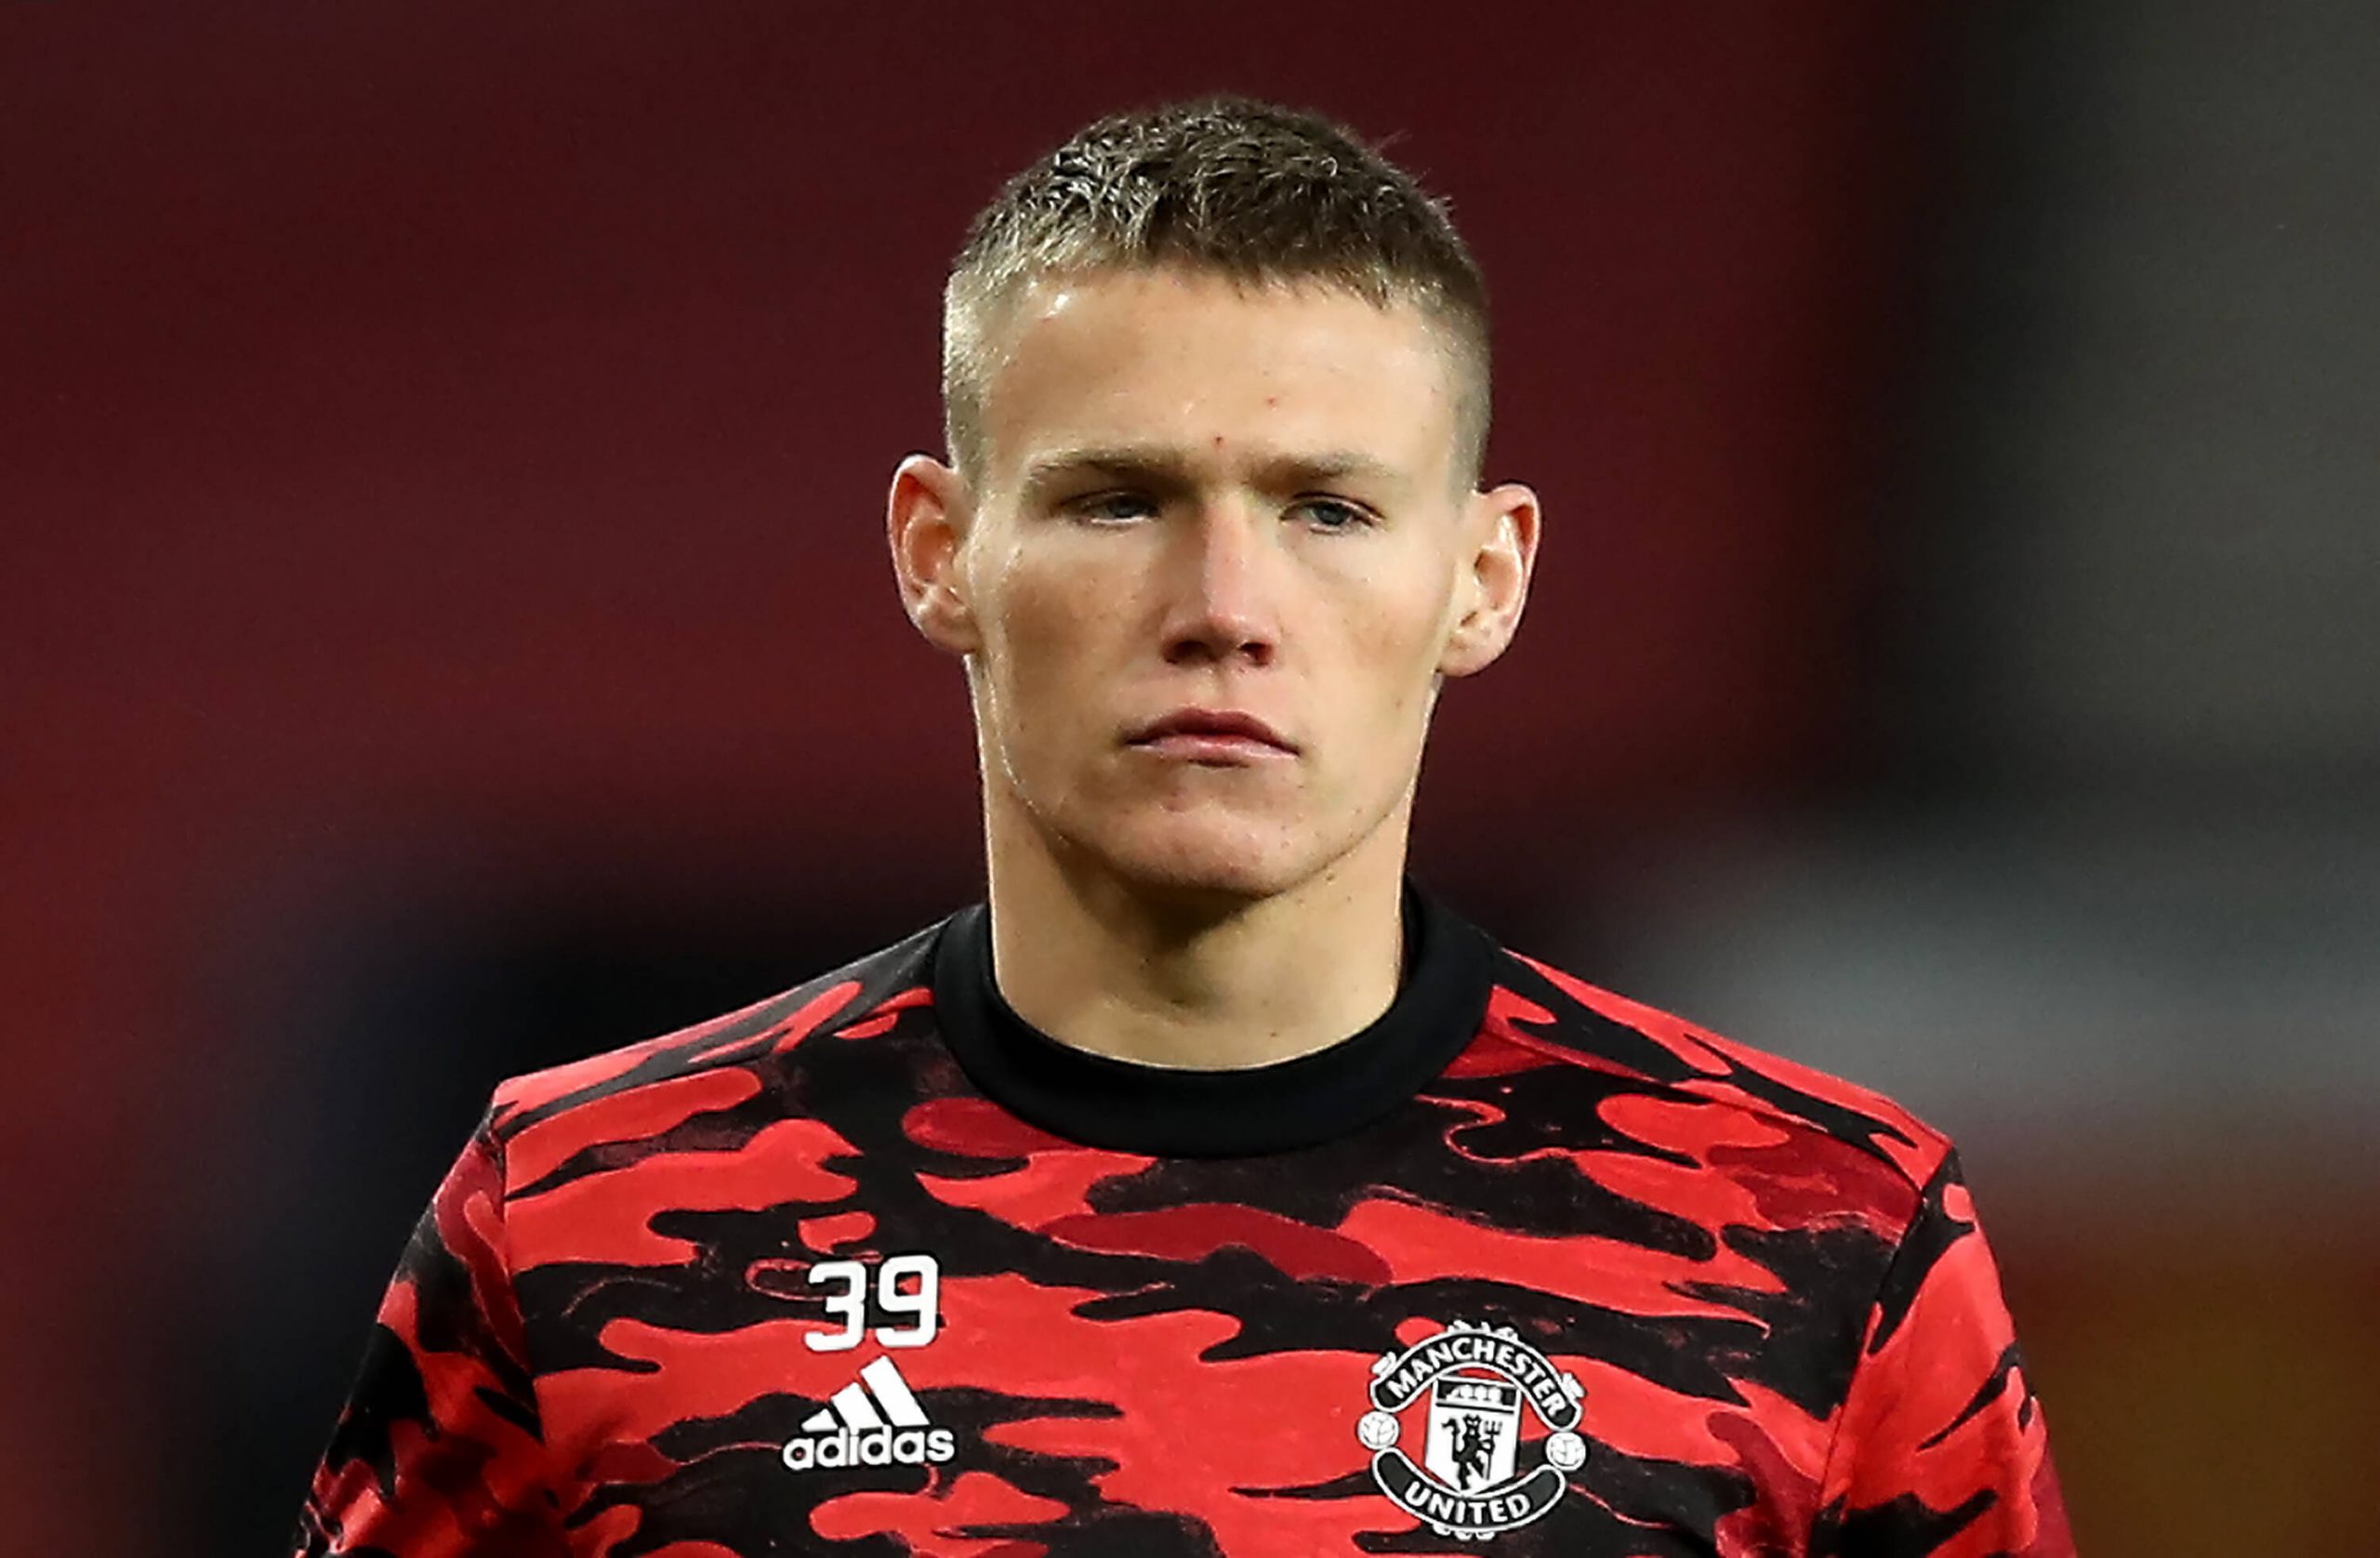 Scott McTominay 'worried' about lack of game time at Manchester United amidst Newcastle United interest.